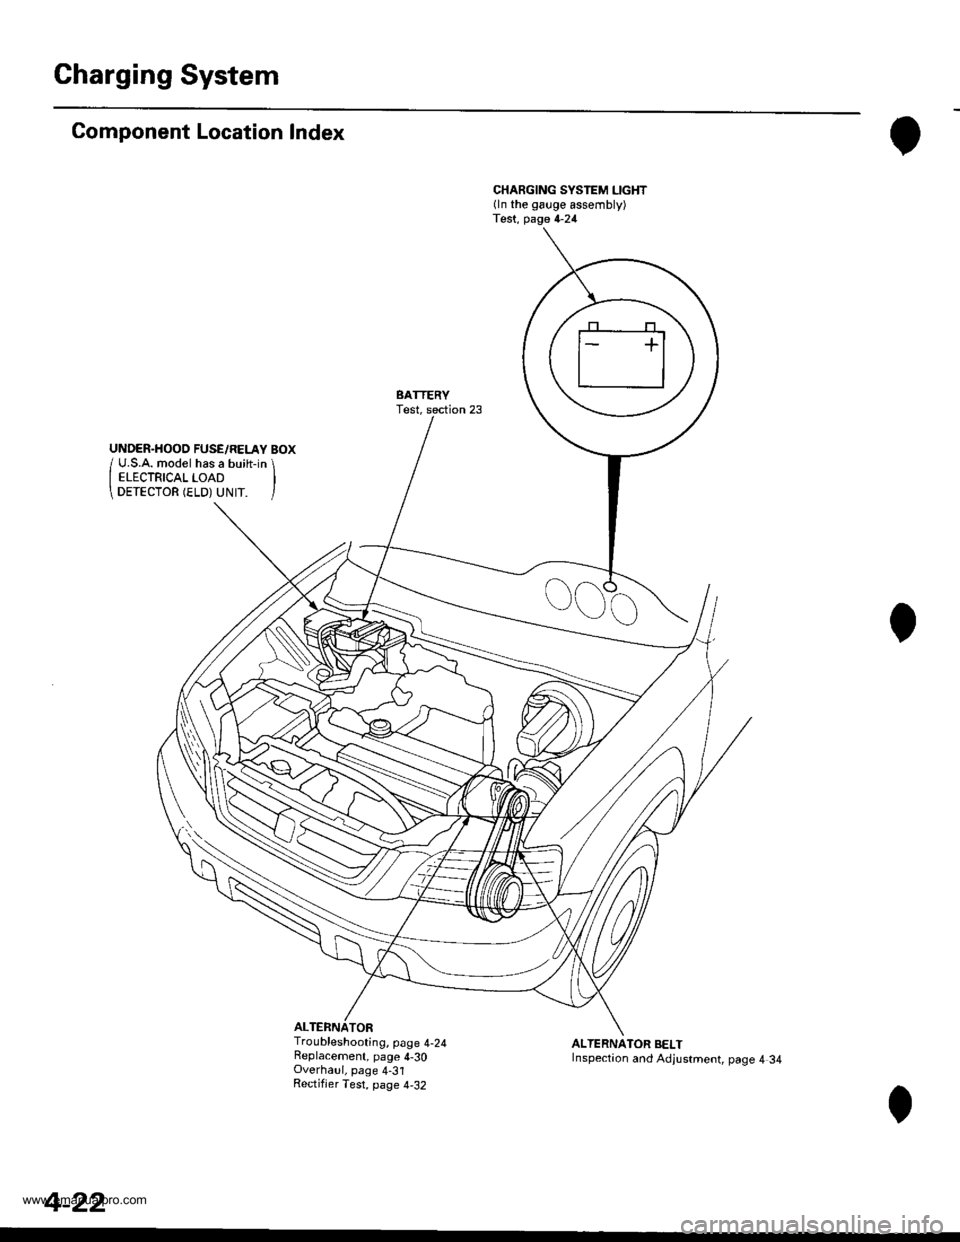 HONDA CR-V 1998 RD1-RD3 / 1.G Workshop Manual 
Charging System
Component Location Index
ALTERNATOR
CHARGING SYSTEM LIGHT(ln the gauge assembly)Test, page 4-24
BATTERYTest,
Troubleshooting, page 4-24Replacement, page 4-30Overhaul, page 4-31Rectifj